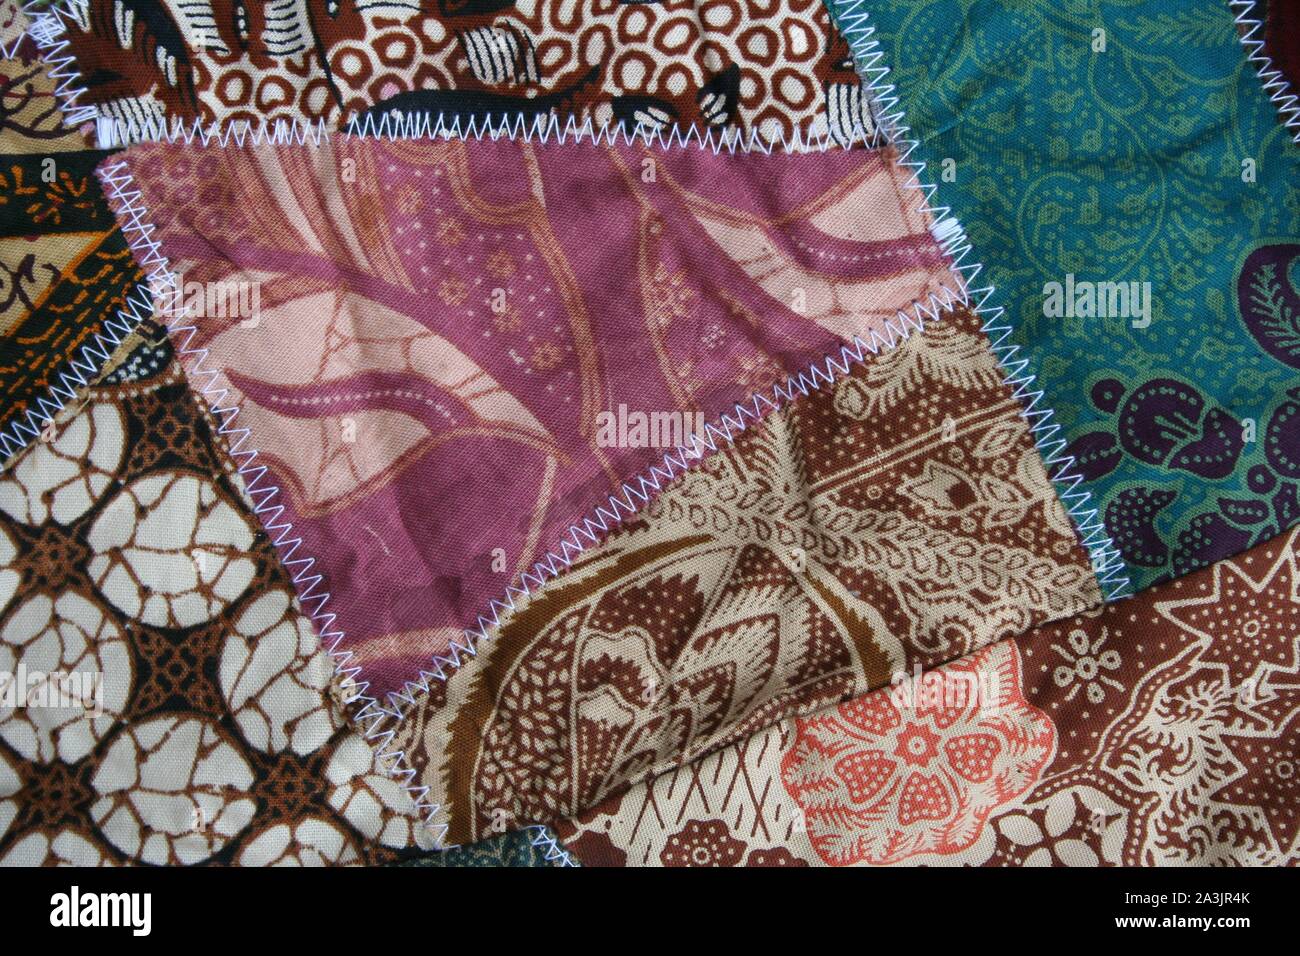 Batik material background, Indonesian material pieced together with white zigzag stiches in crazy quilt design in colorful blue green pink and brown c Stock Photo